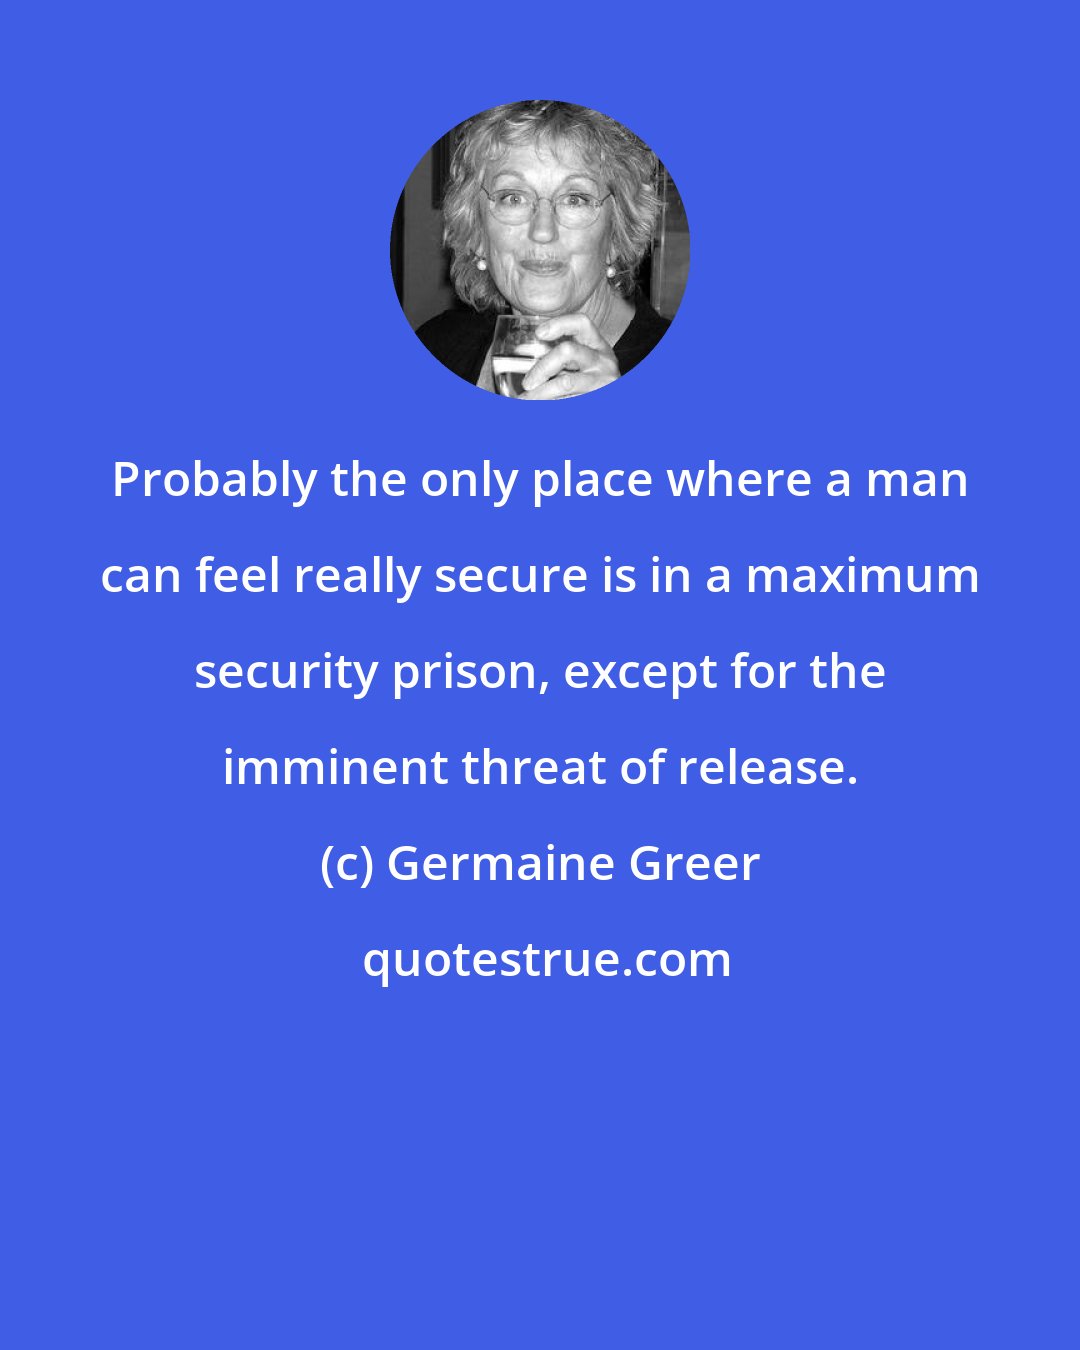 Germaine Greer: Probably the only place where a man can feel really secure is in a maximum security prison, except for the imminent threat of release.